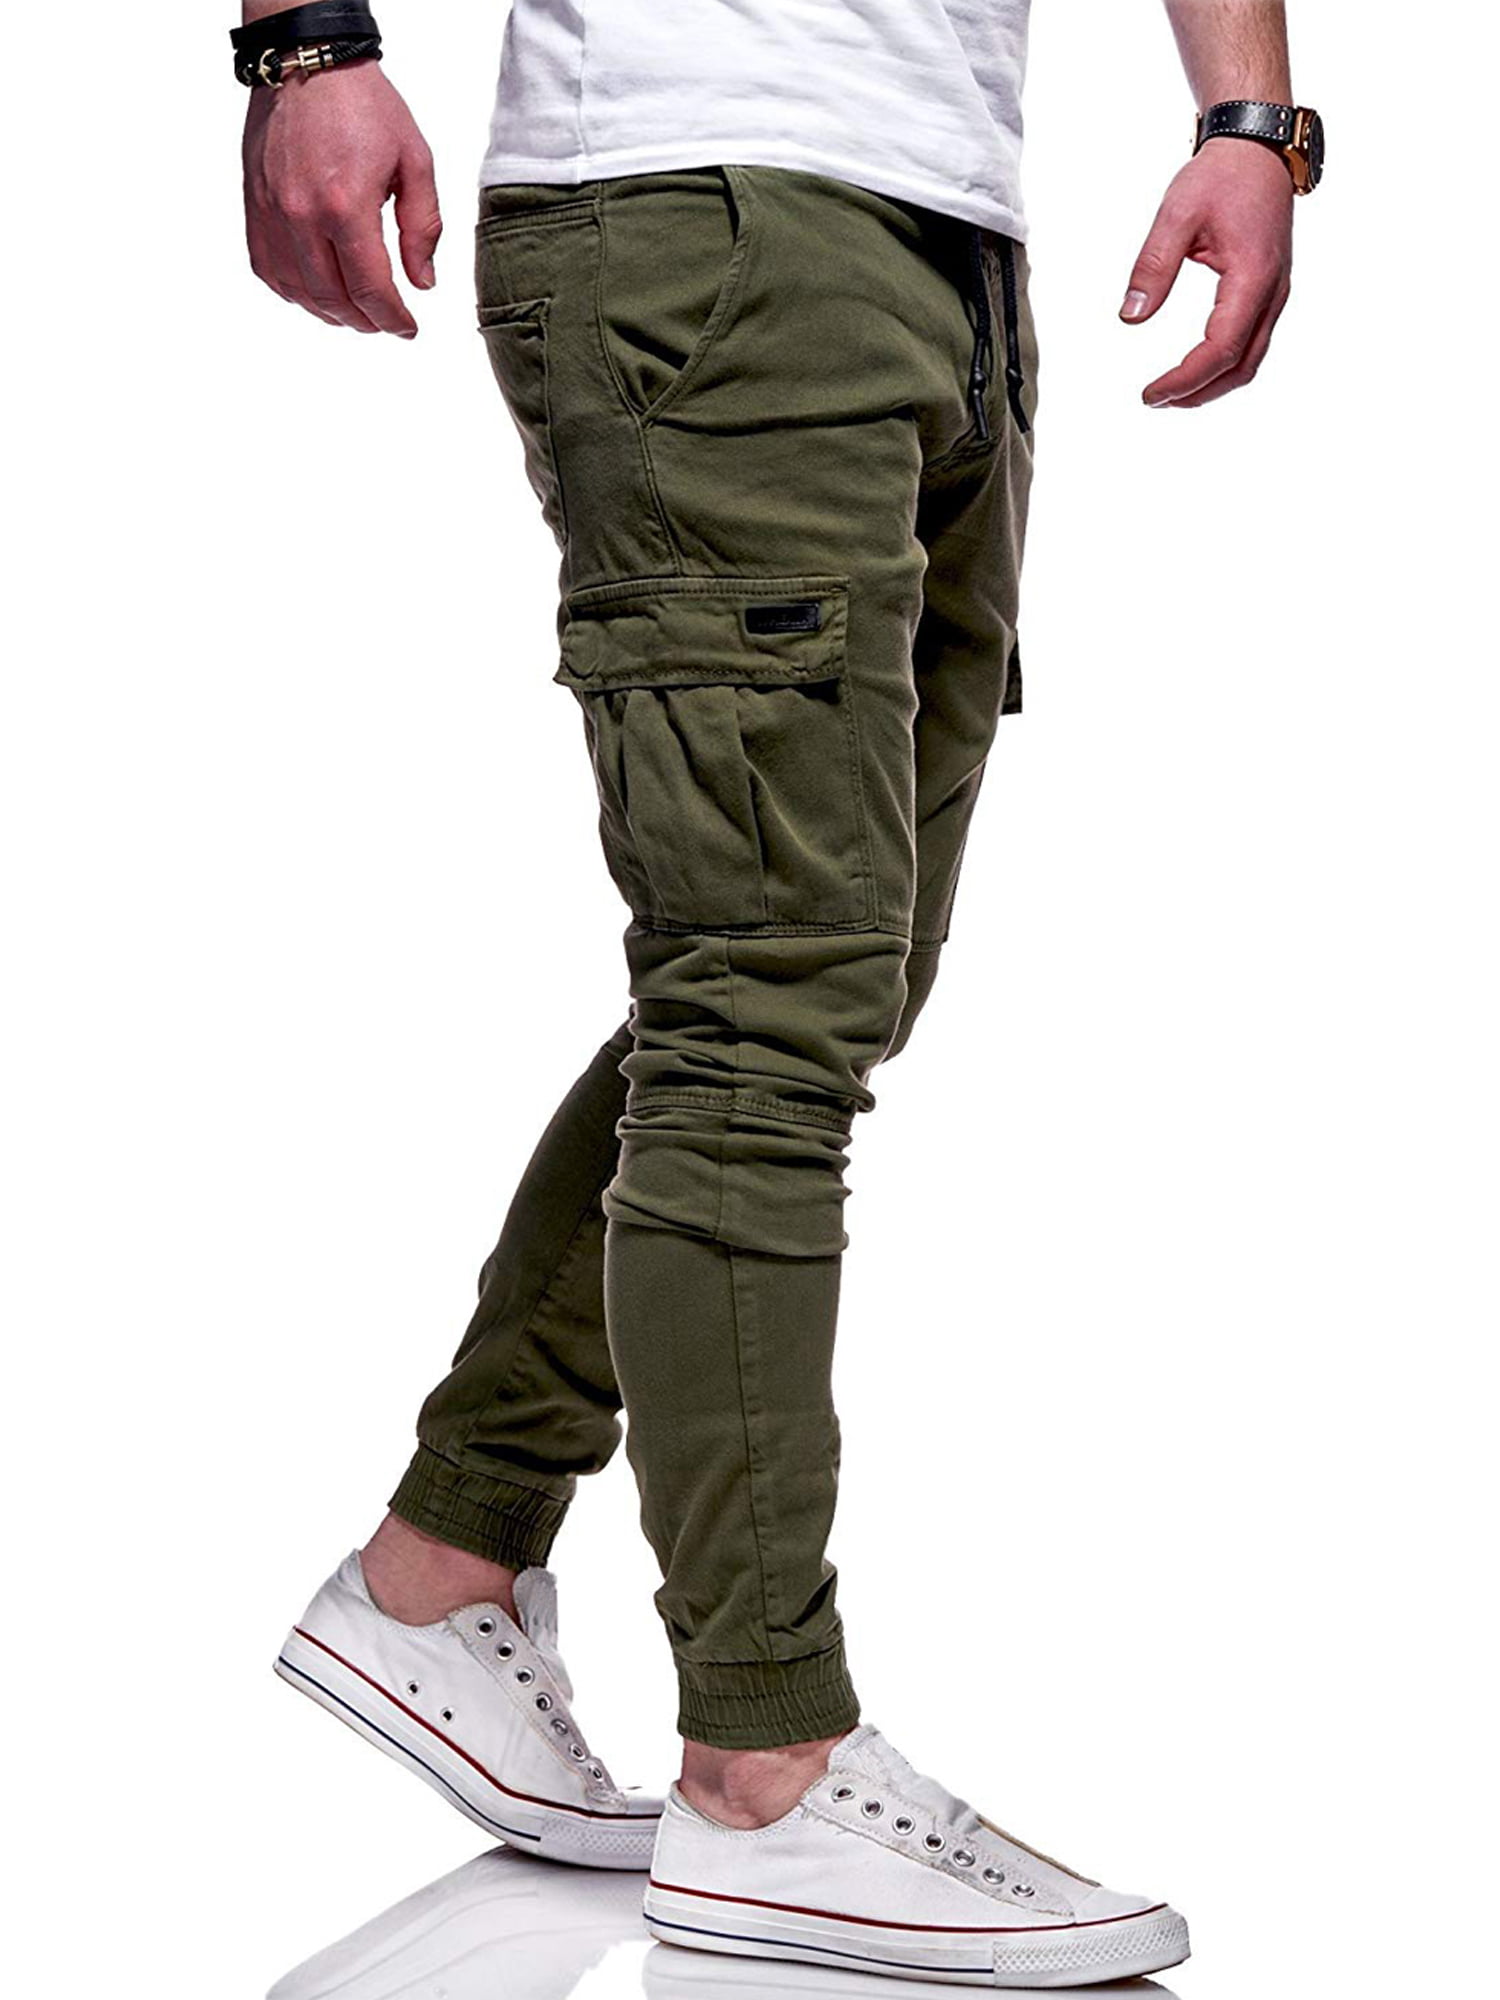 MODOQO Mens Casual Military Army Cargo Pants Cotton Twill Oversized Jogger Work Pants